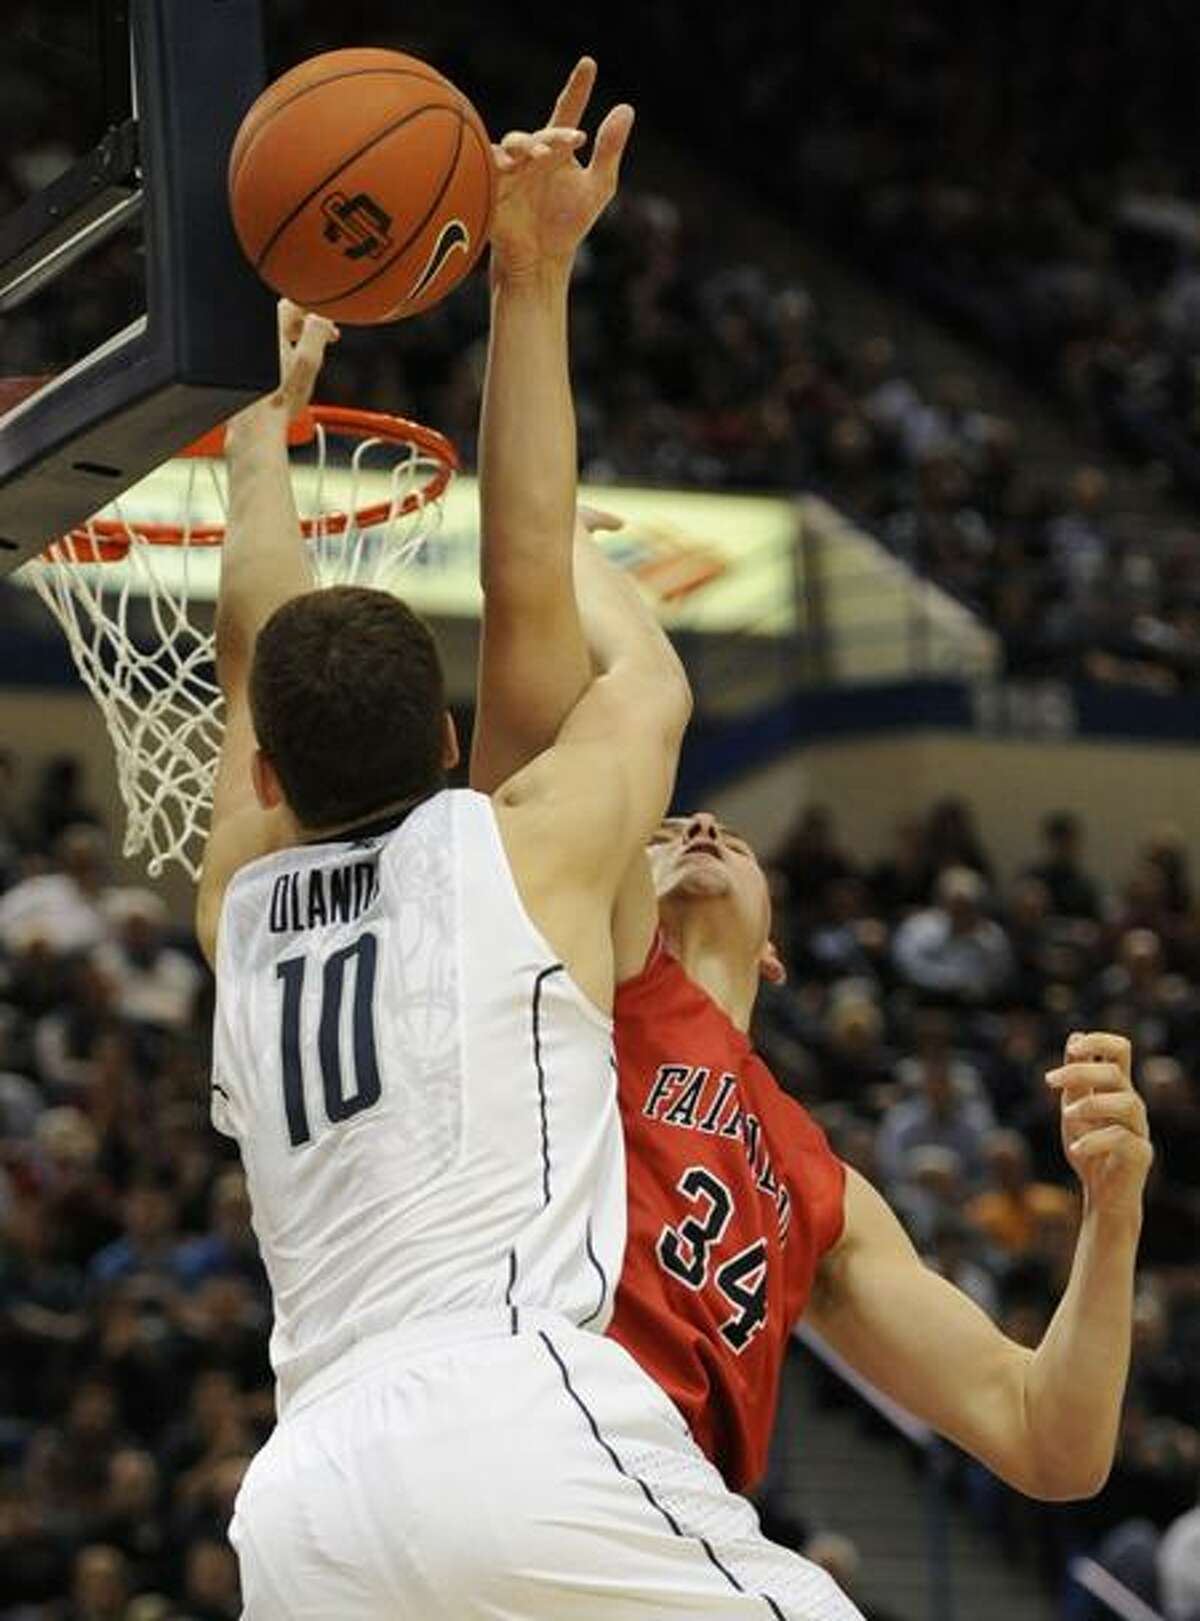 Fairfield's Ryan Olander, right, blocks a dunk attempt by his brother, Connecticut's Tyler Olander, left, during the second half of an NCAA college basketball game in Hartford, Conn., Thursday, Dec. 22, 2011. Connecticut won 79-71. (AP Photo/Jessica Hill)